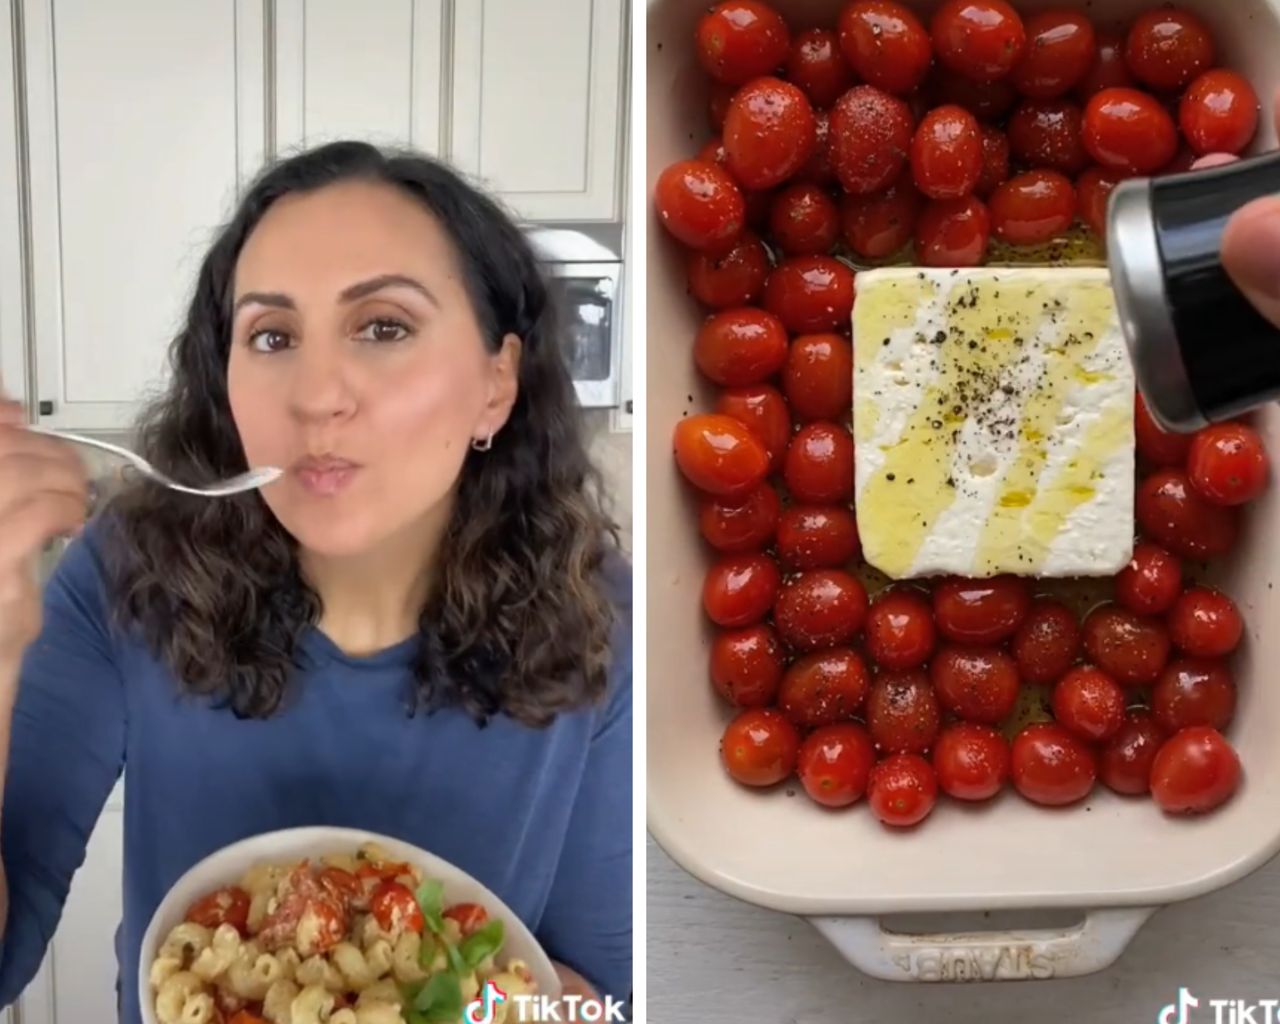 "Feel Good Foodie" takes over TikTok with her quick and easy baked feta pasta recipe